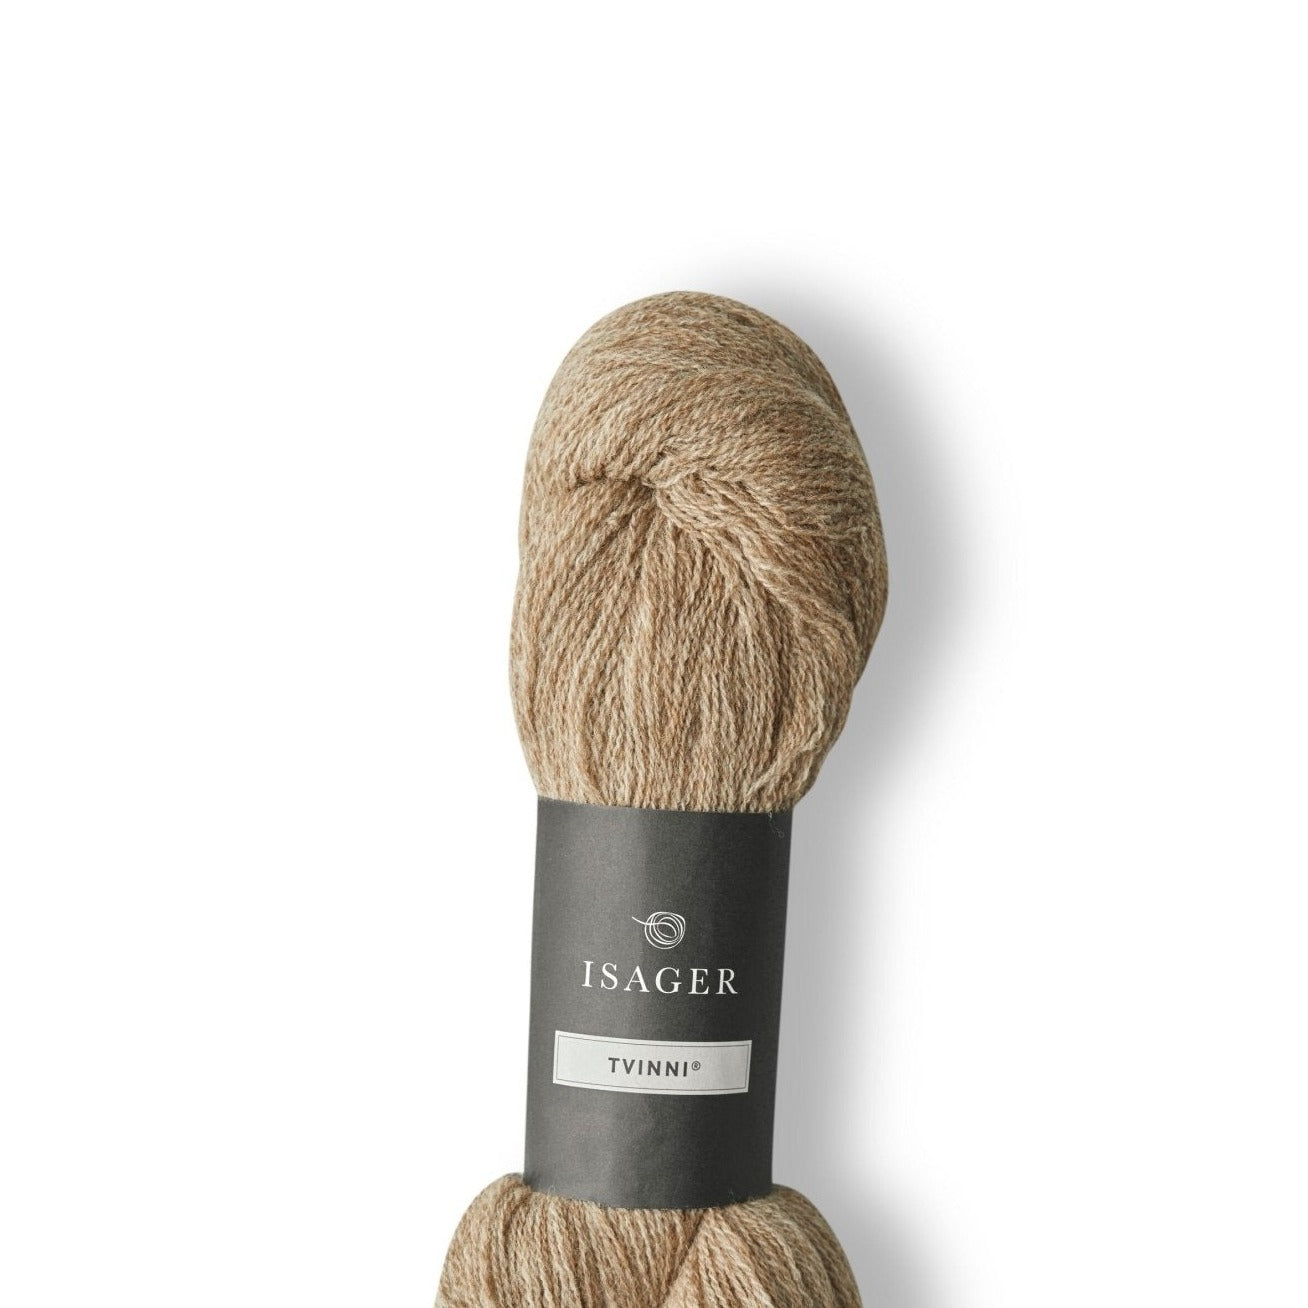 Isager Tvinni - 7s - 4 Ply - Isager - The Little Yarn Store